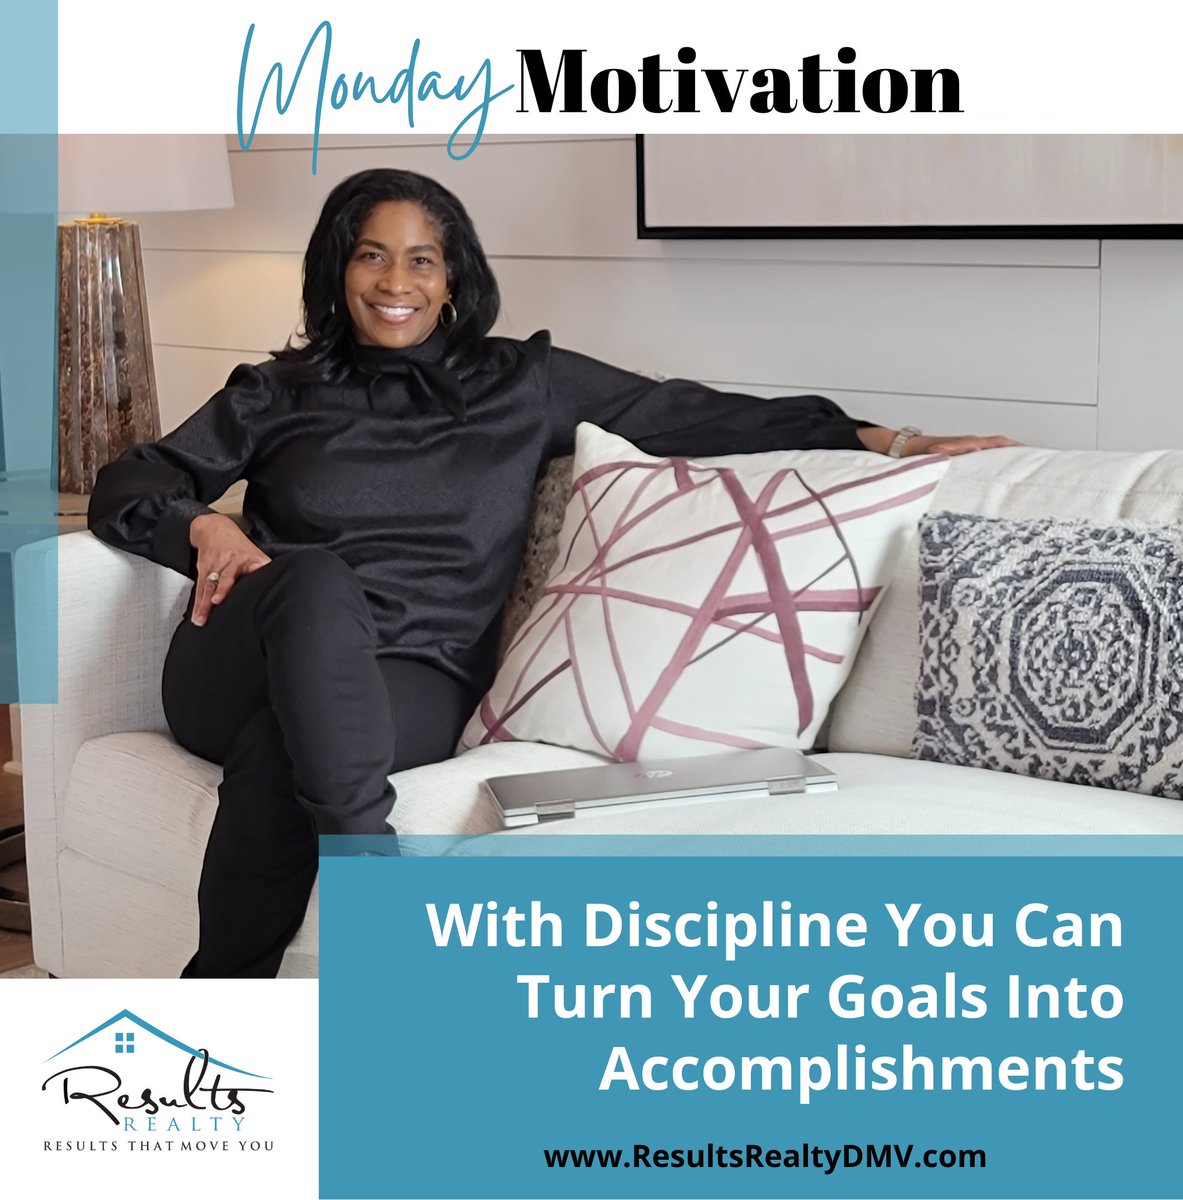 Without discipline, our goals remain distant dreams, but with it, they become tangible accomplishments.

----------

Facebook - facebook.com/ResultsRealtyD…
YouTube - bit.ly/2oA70K5
Website - ResultsRealtyDMV.com

#MondayMotivation #Discipline #SharonLBrown #ResultsRealty